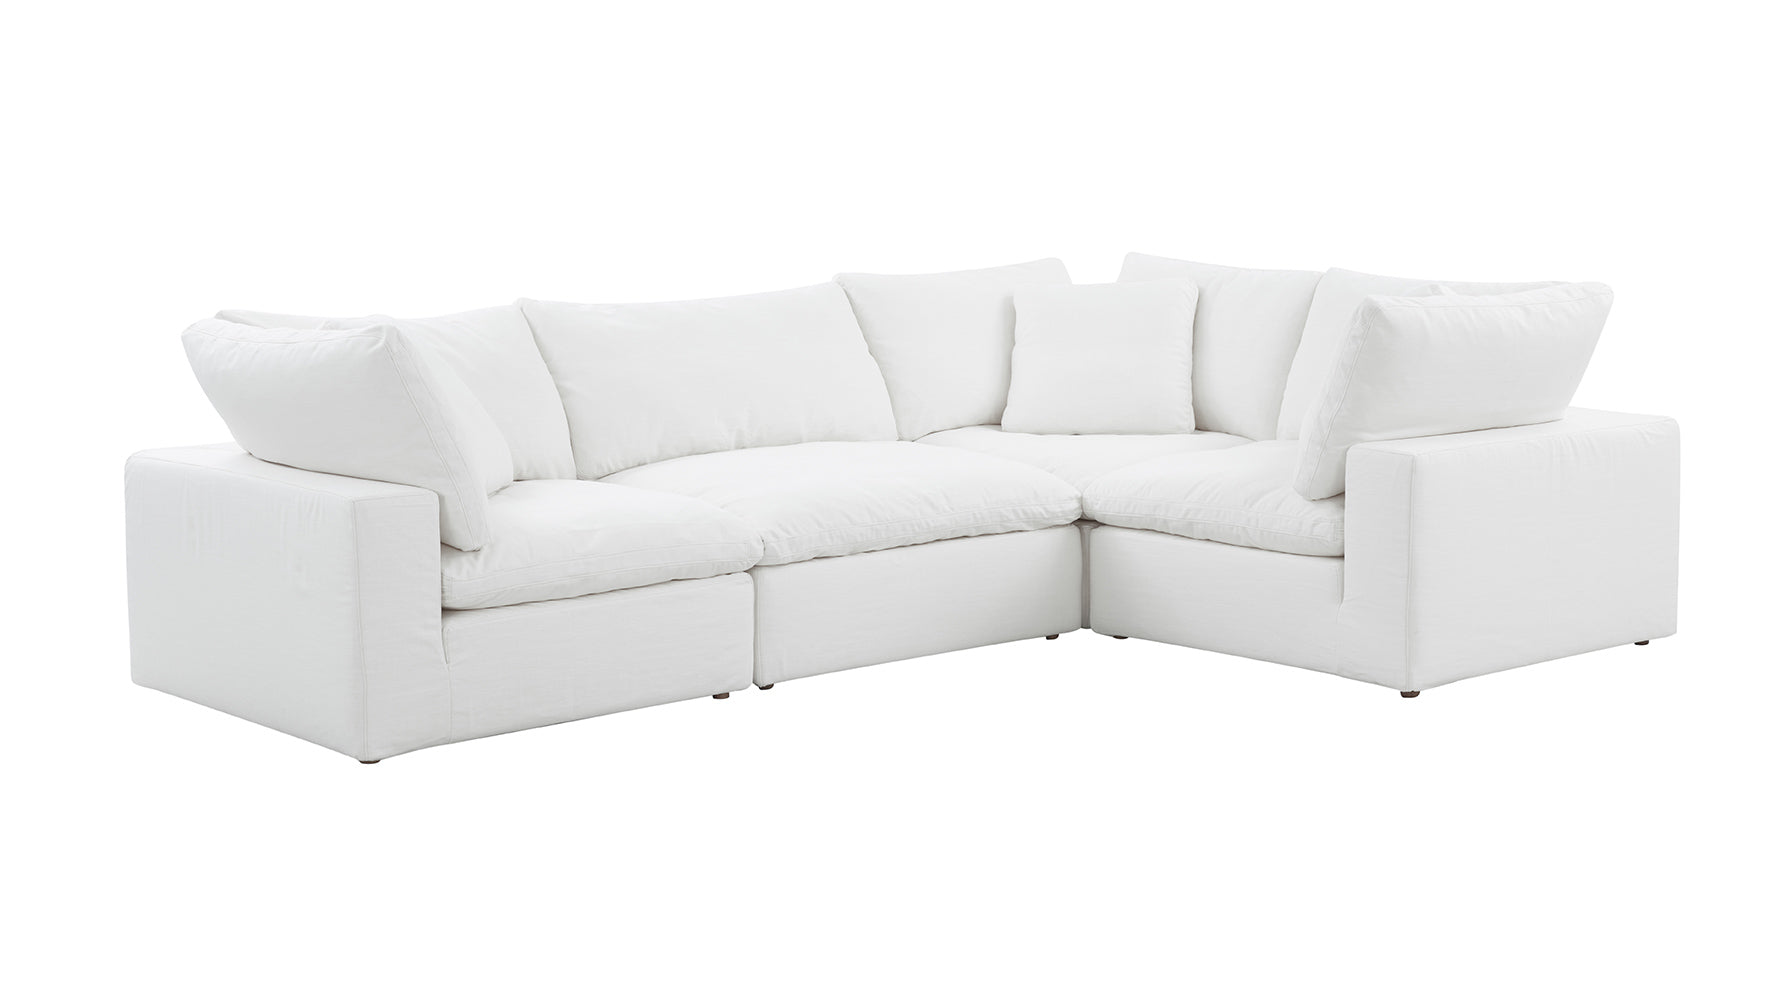 Movie Night™ 4-Piece Modular Sectional Closed, Large, Brie - Image 3